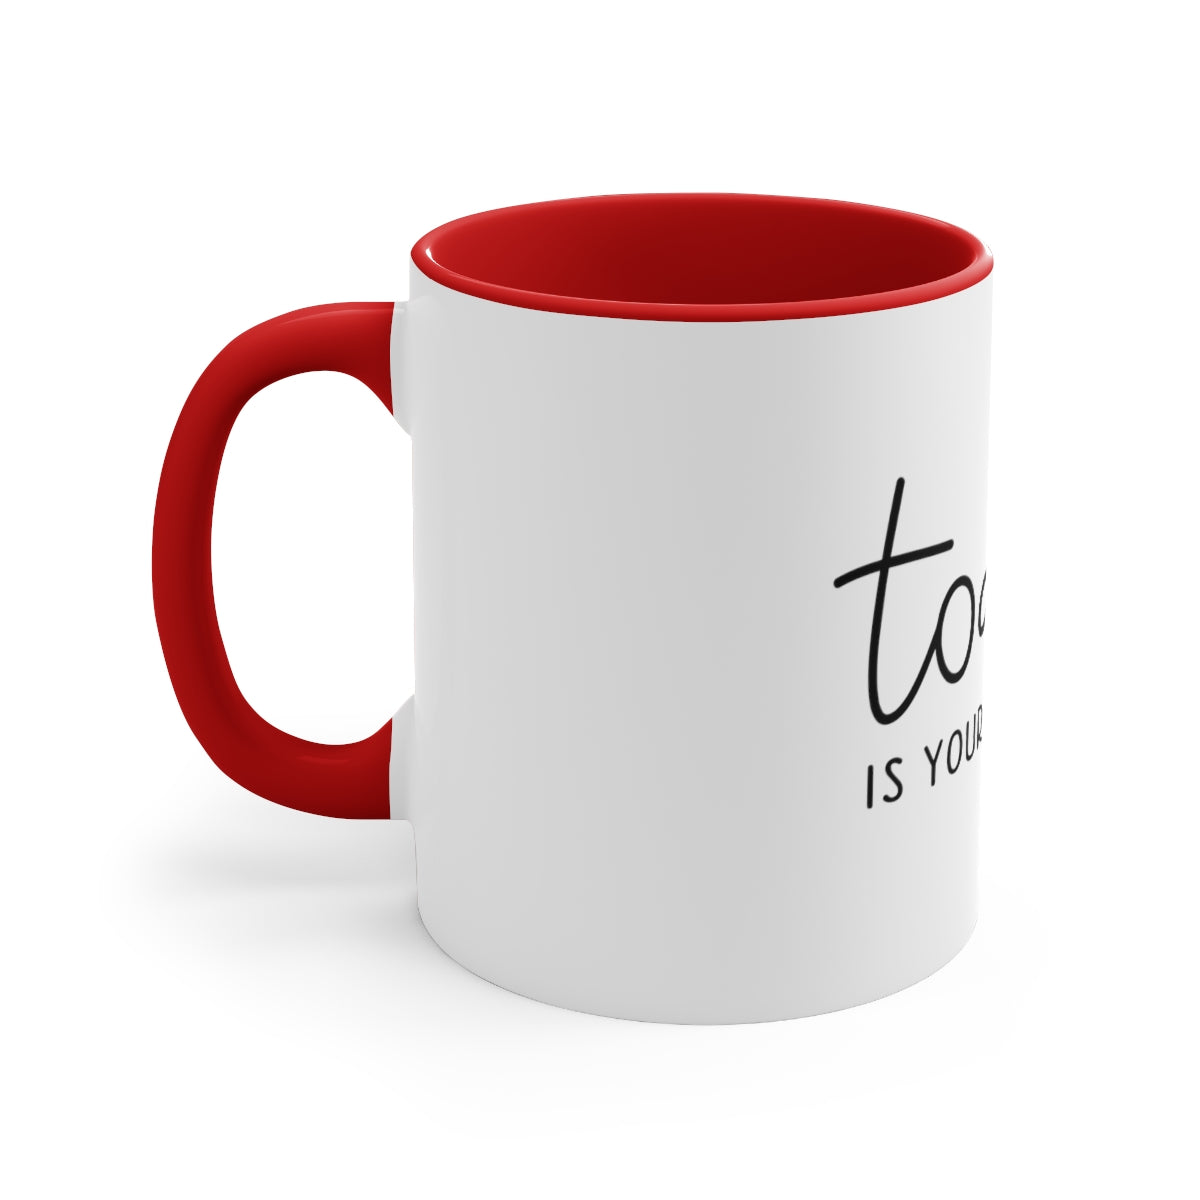 Today is your day Accent Coffee Mug, 11oz